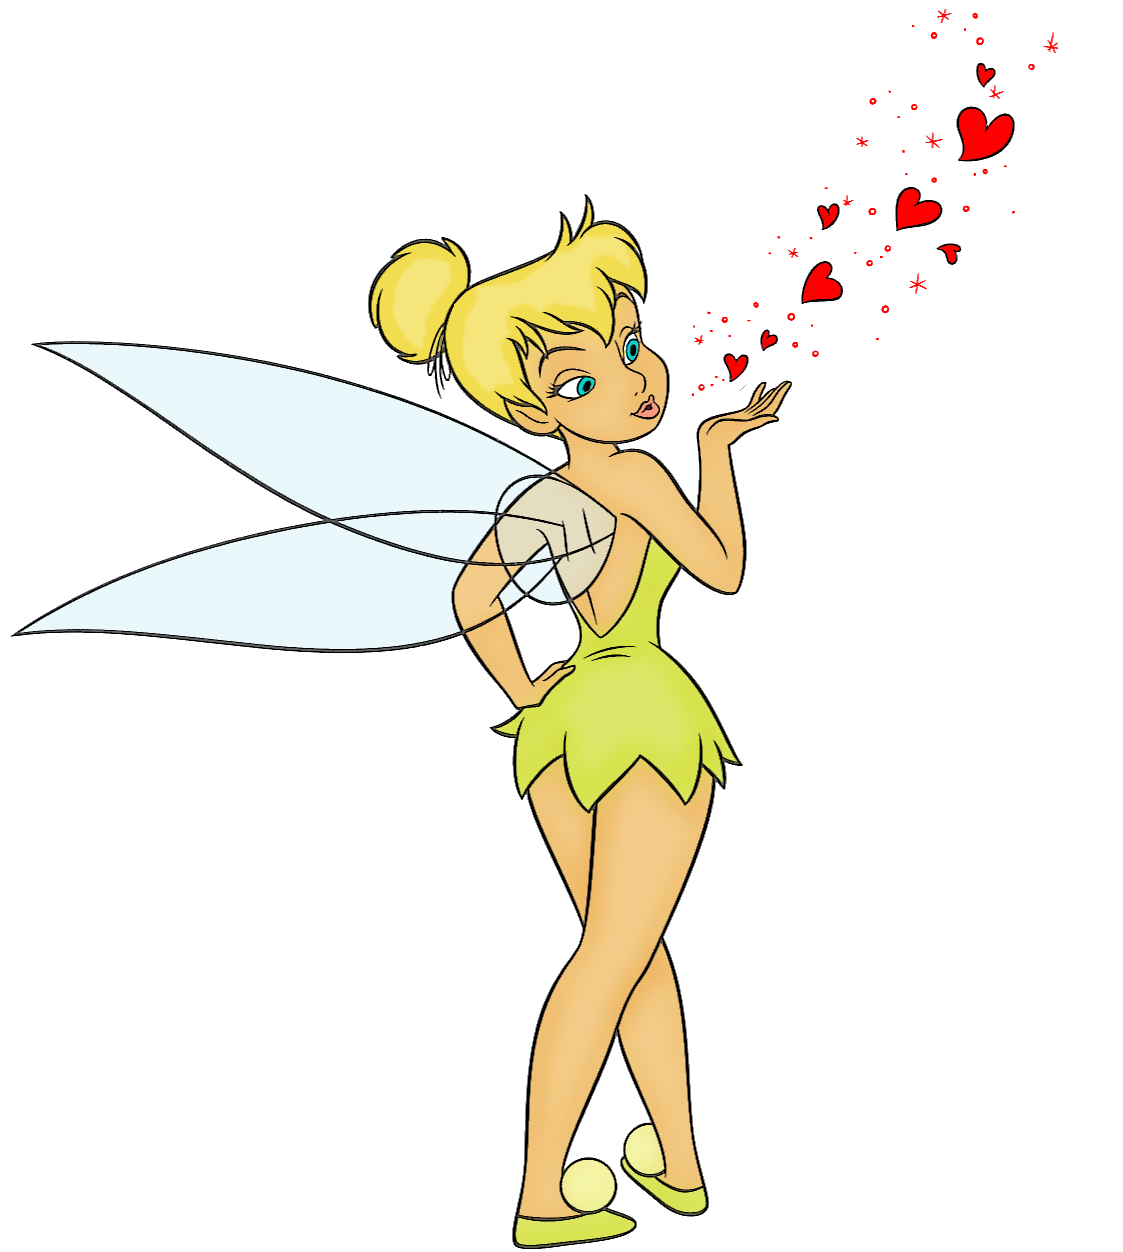 Tinkerbell coloring pages coloring.filminspector.com